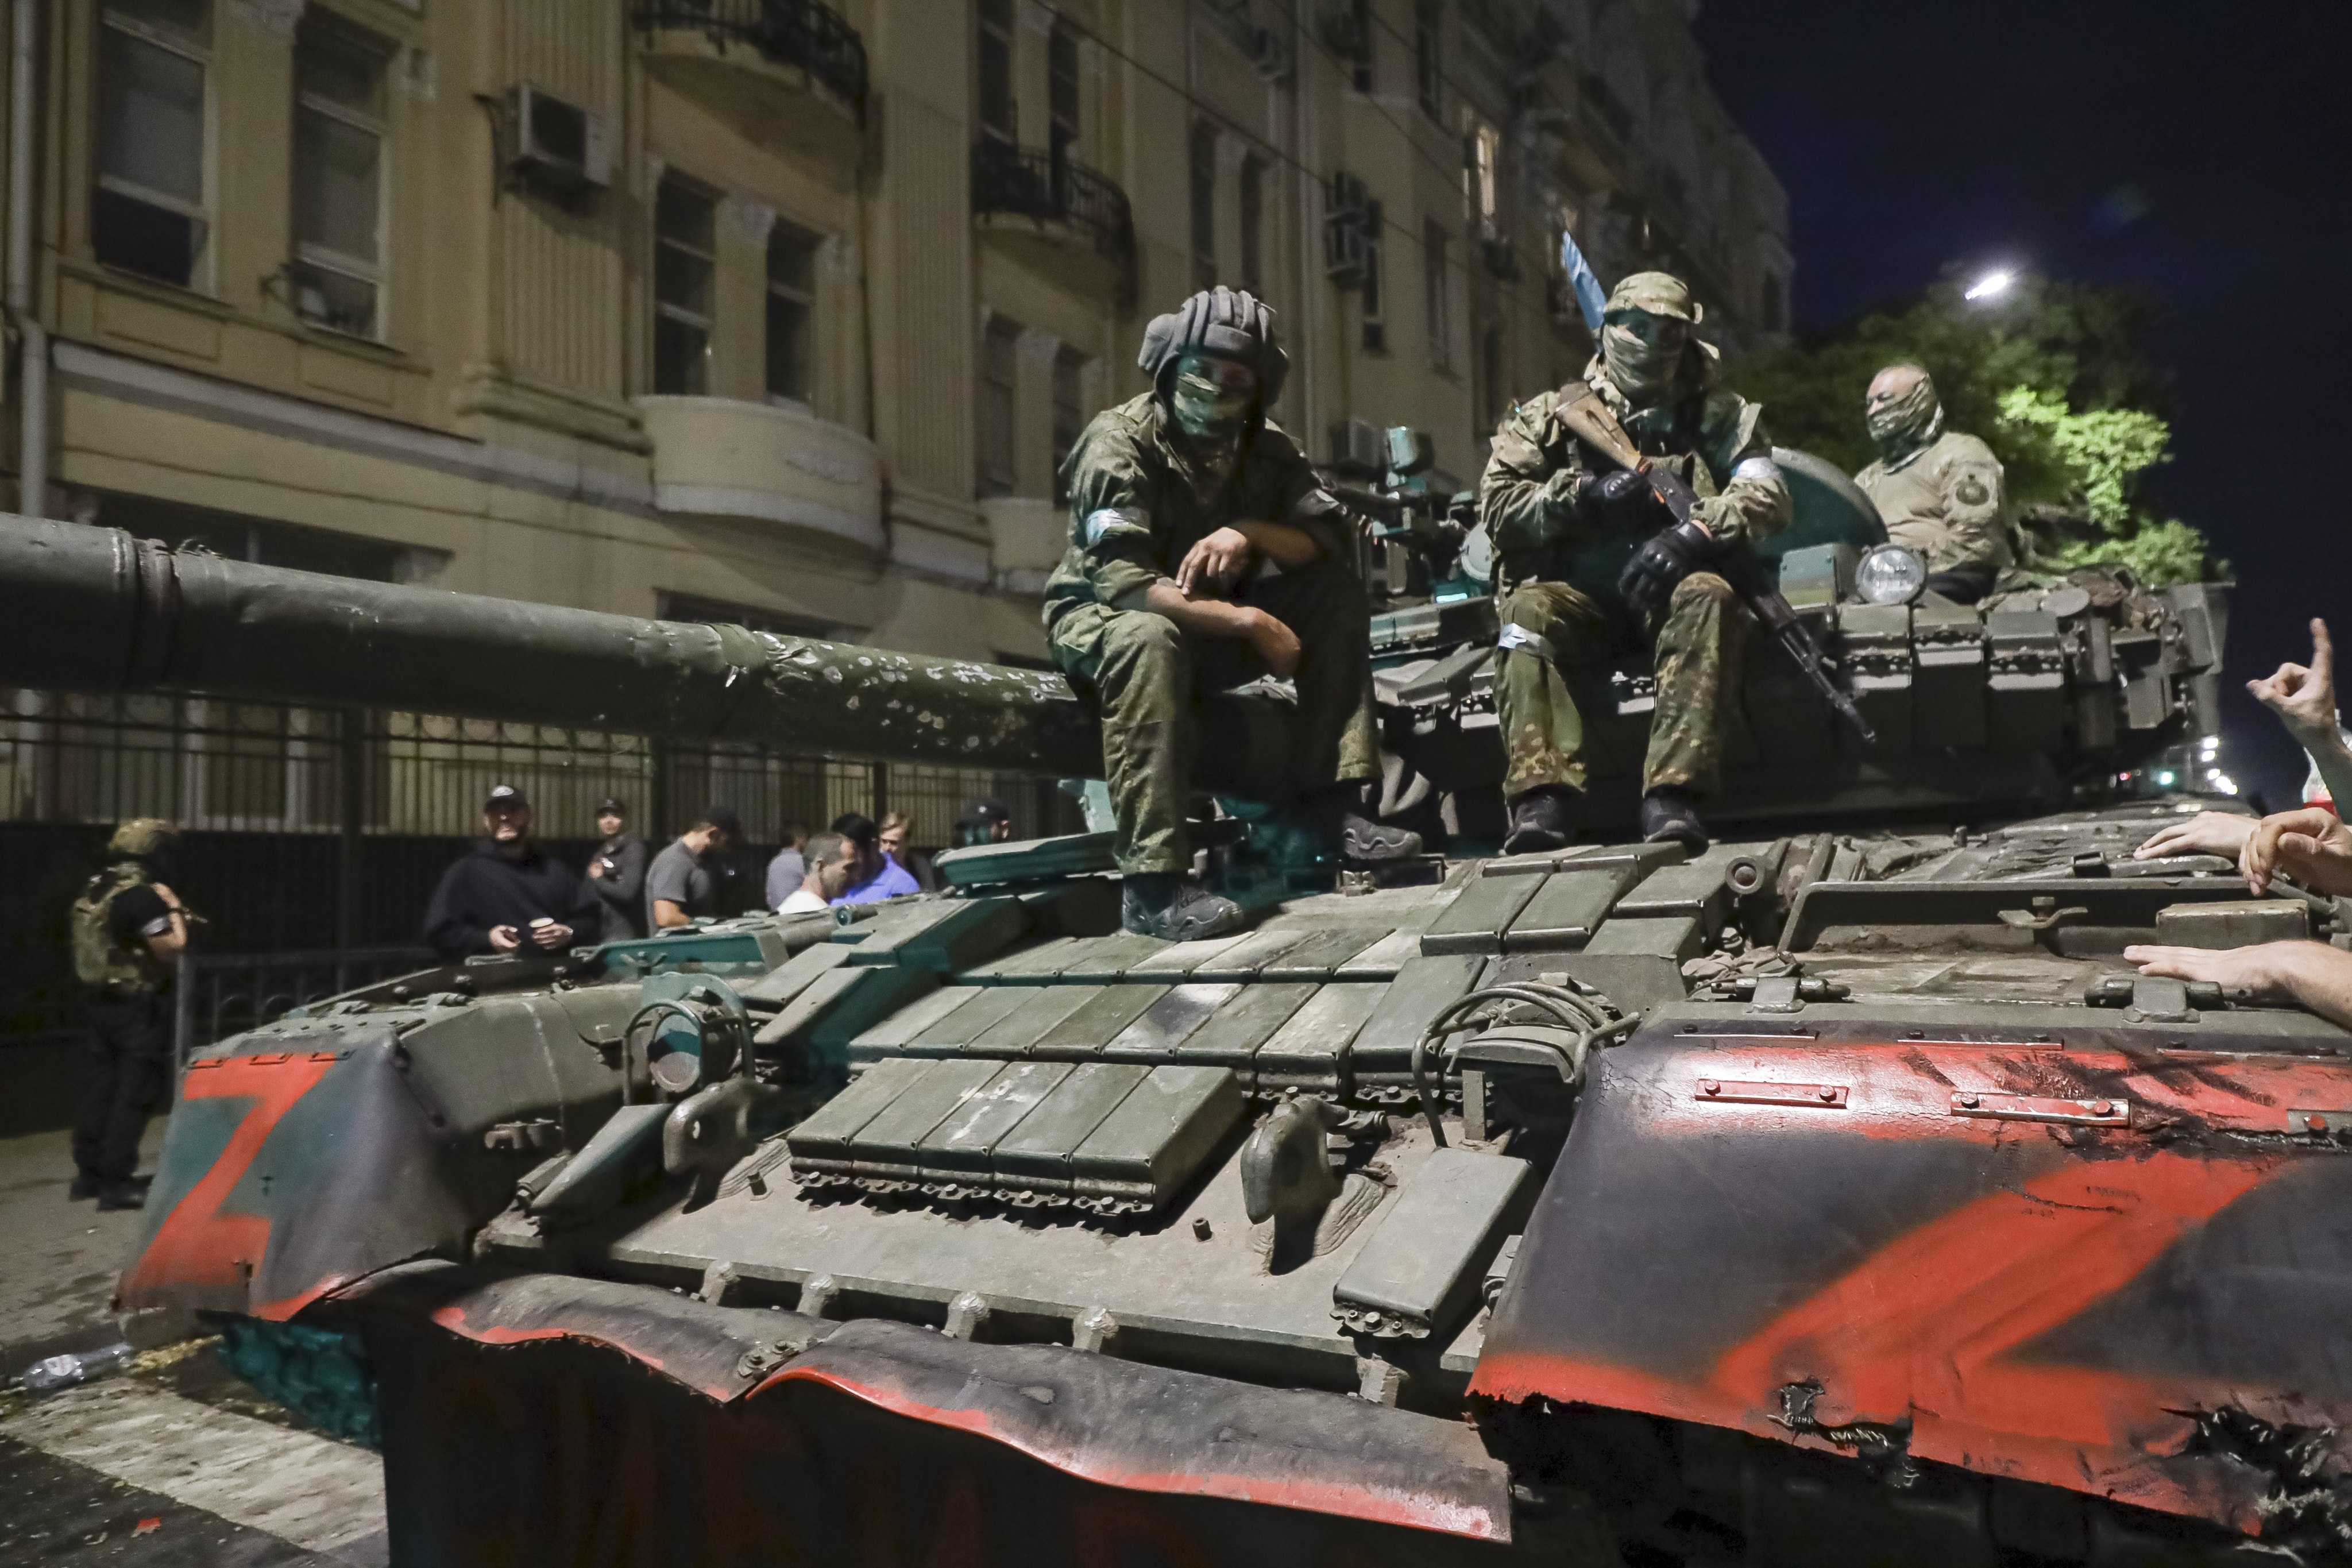 Members of the Wagner Group military company sit atop a tank on a street in Rostov-on-Don, Russia, on Saturday. Photo: AP